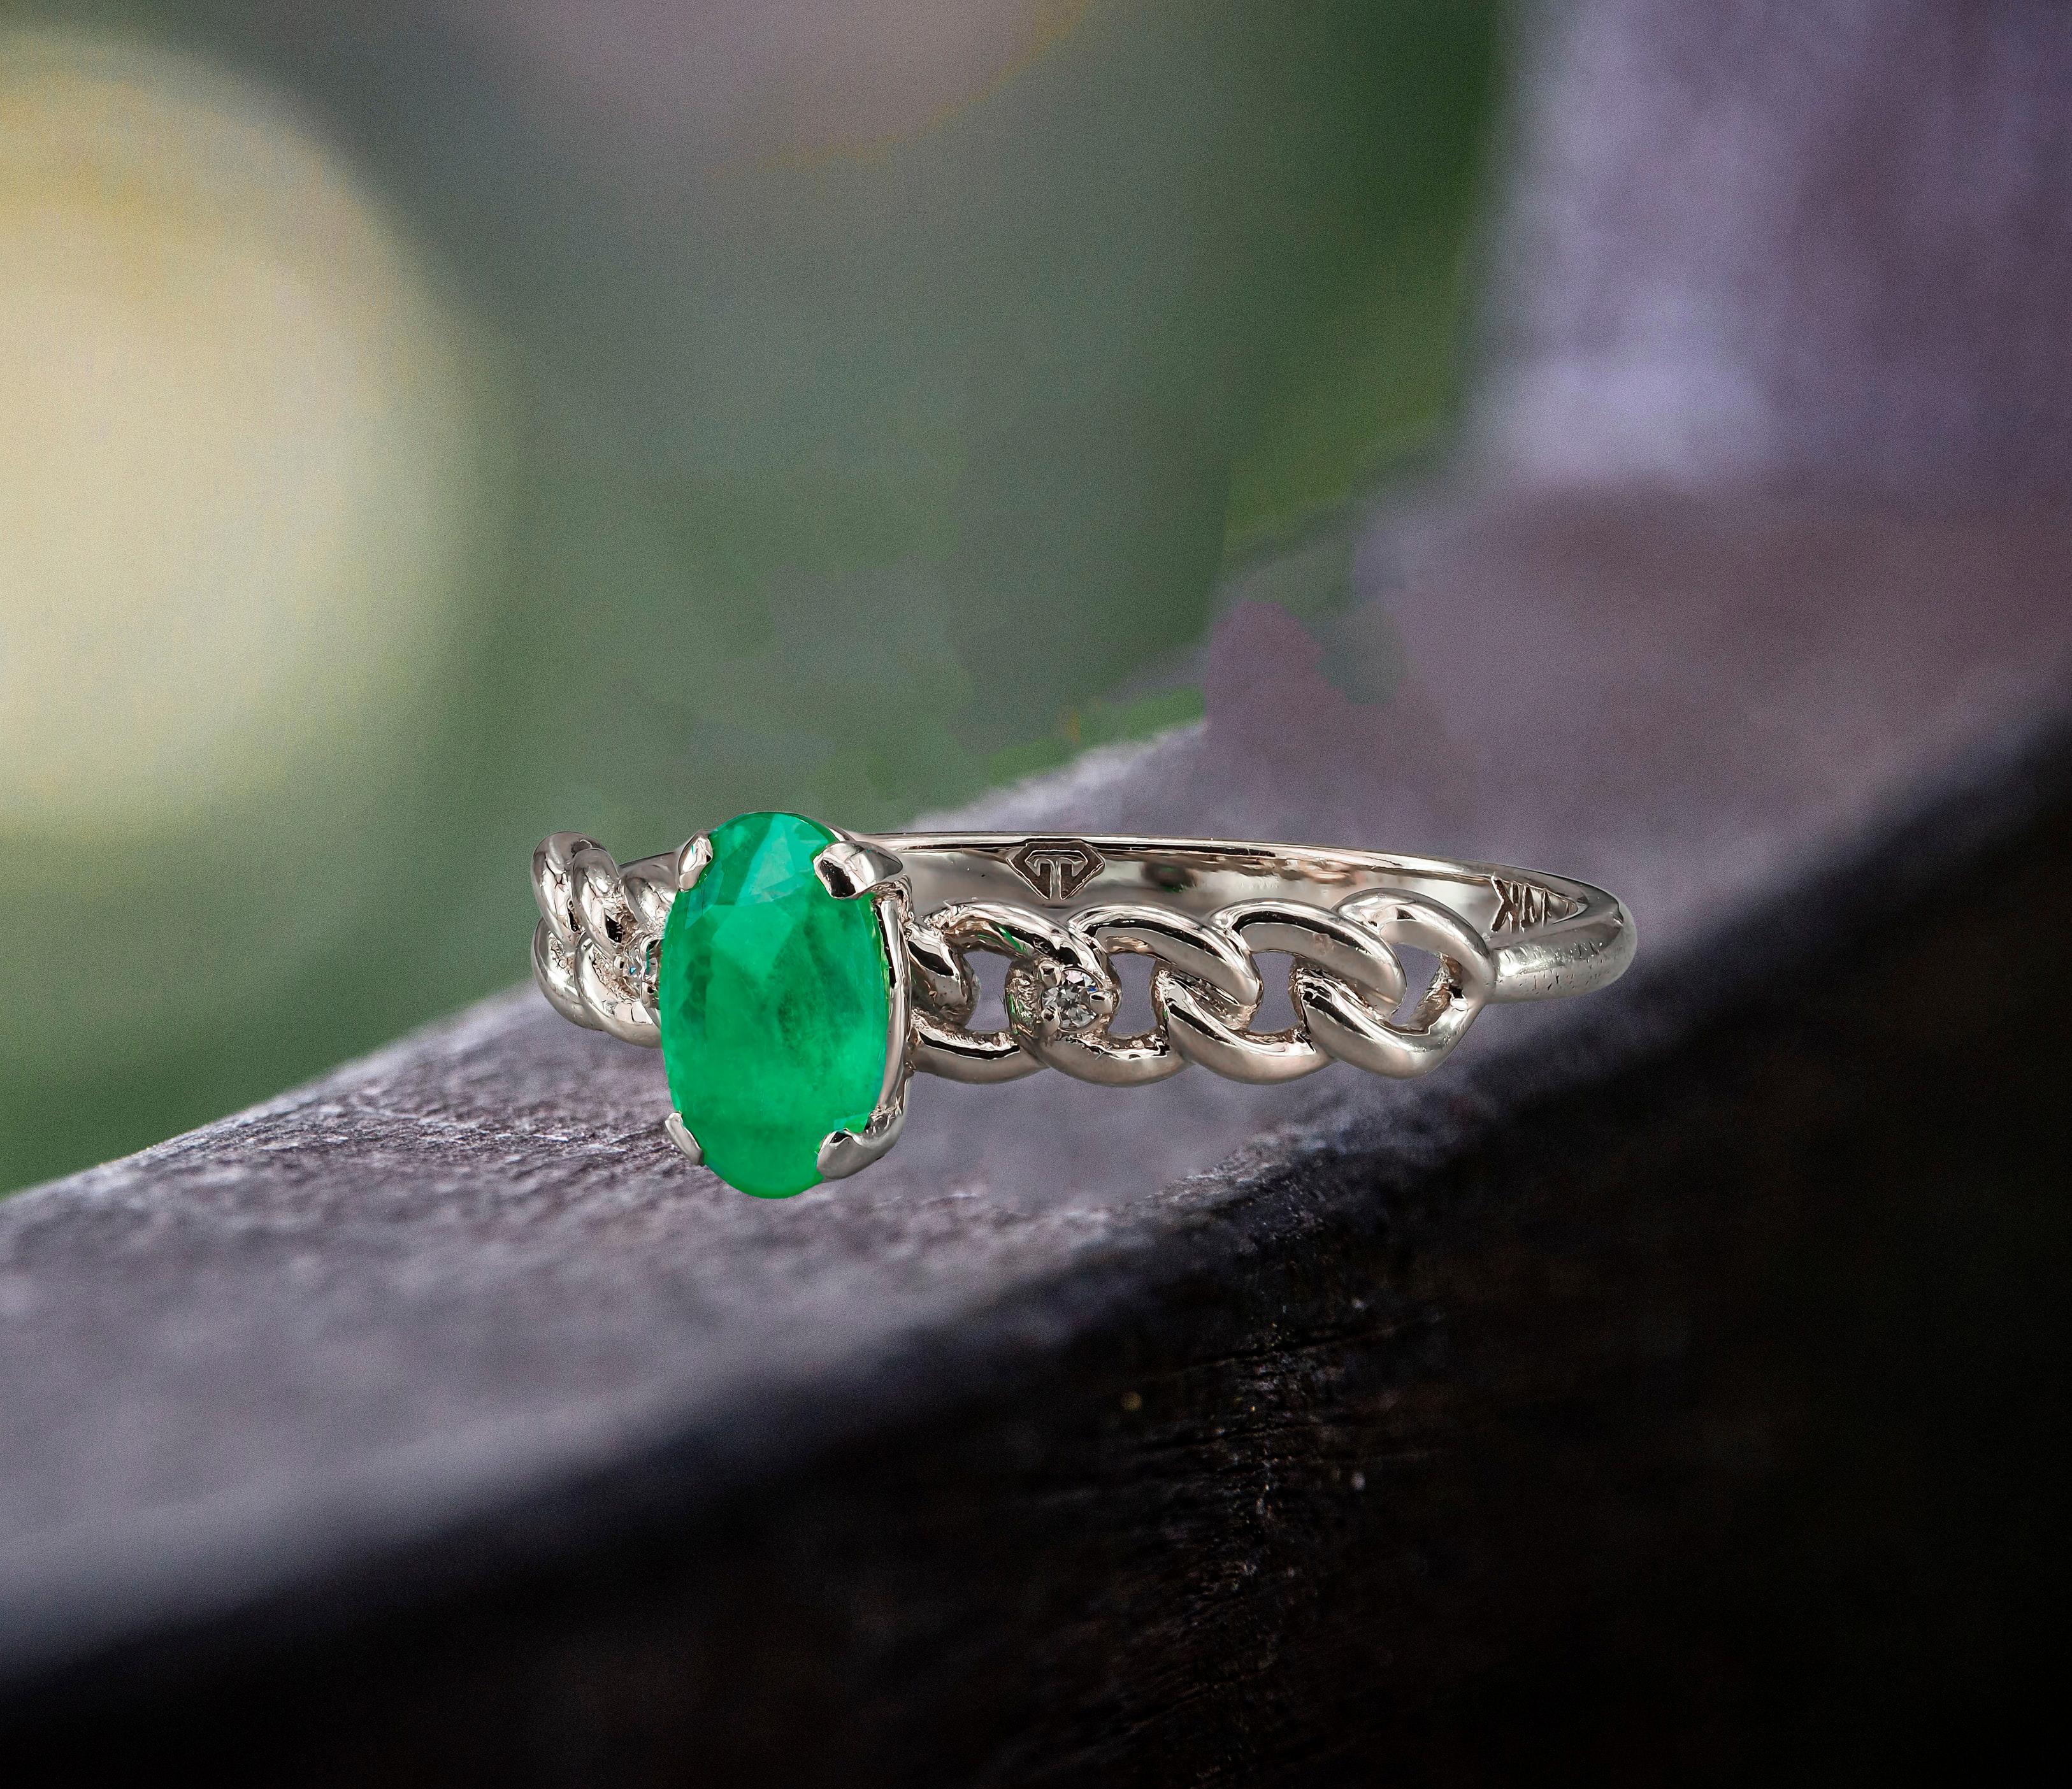 For Sale:  Emerald and diamonds 14k gold ring. Oval emerald gold ring. 9